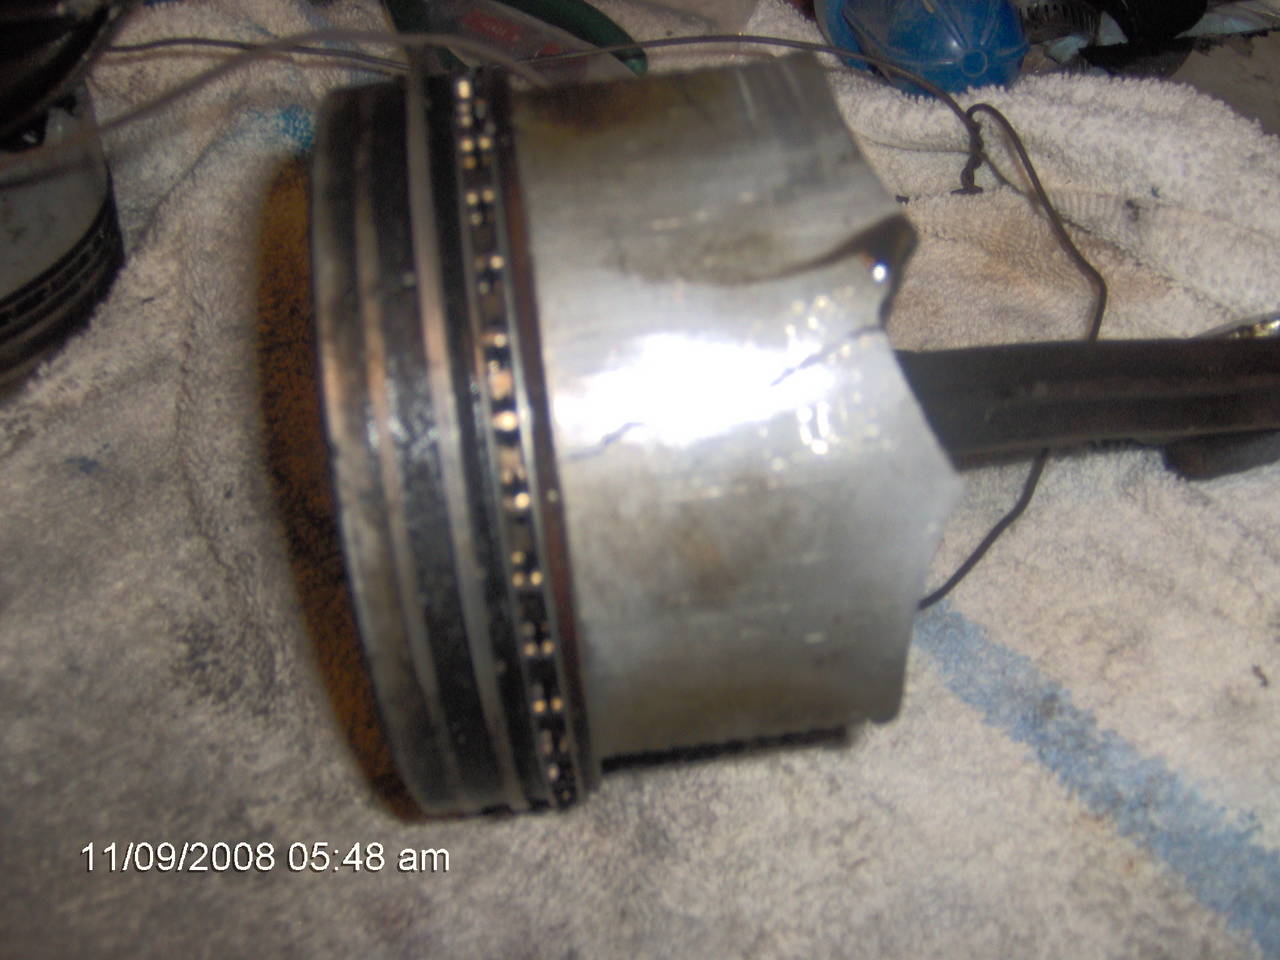 Pistons # 3 and 7 out of the 428 I had in The Mule